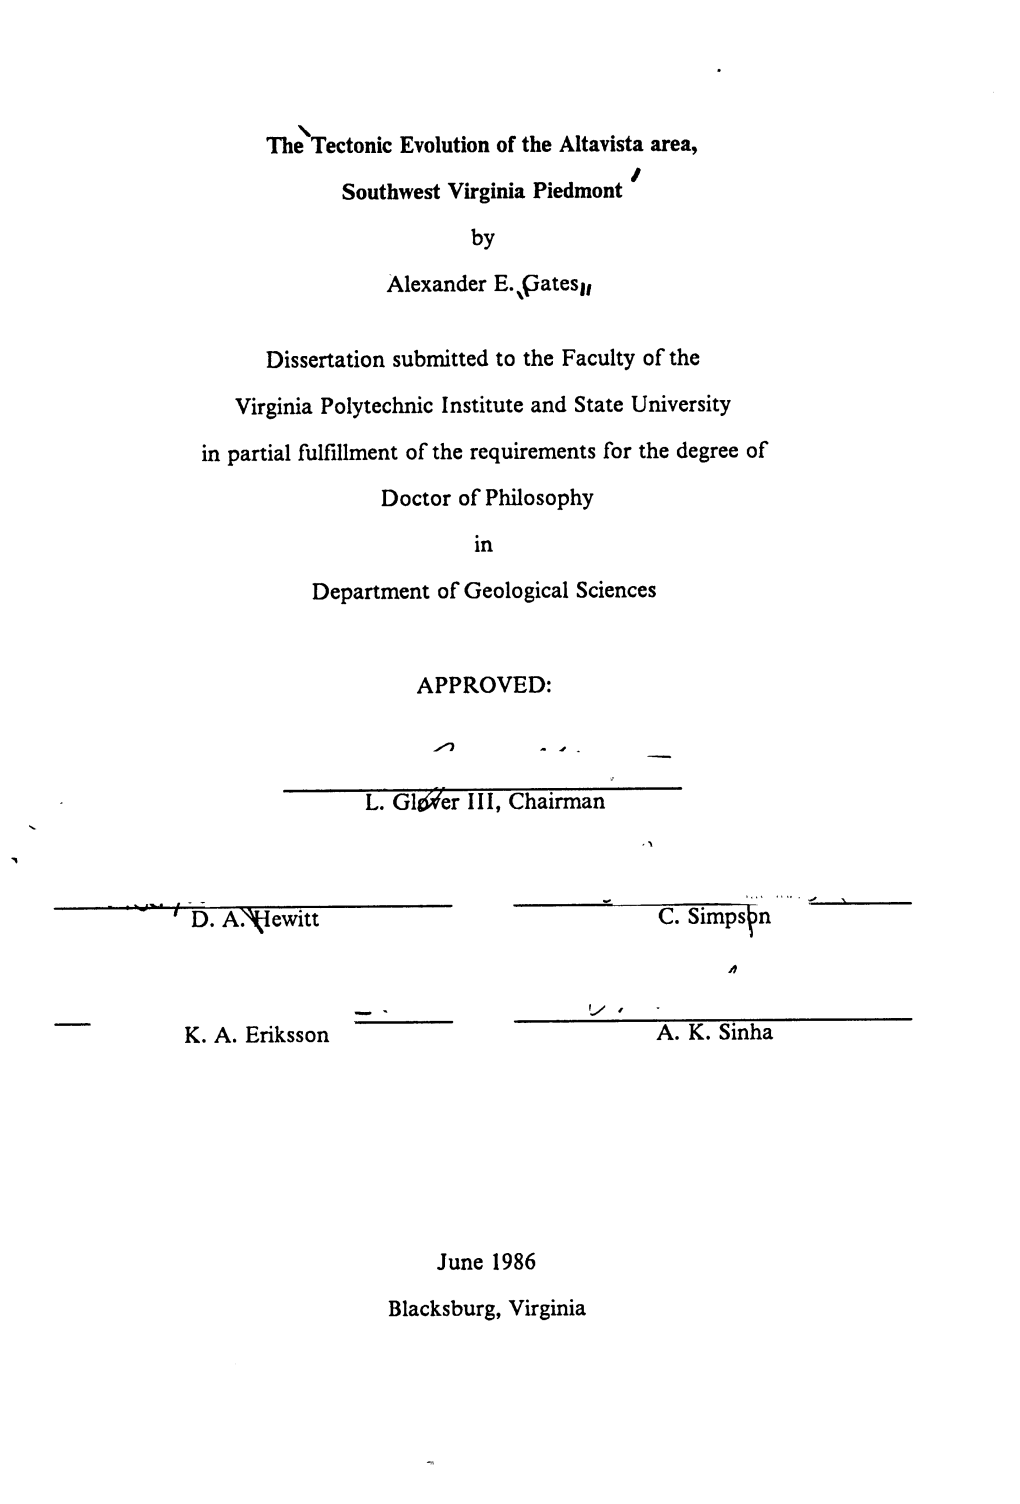 Alexander E.\(3Ates„ Dissertation Submitted to the Faculty of the Virginia Polytechnic Institute and State University Doctor O